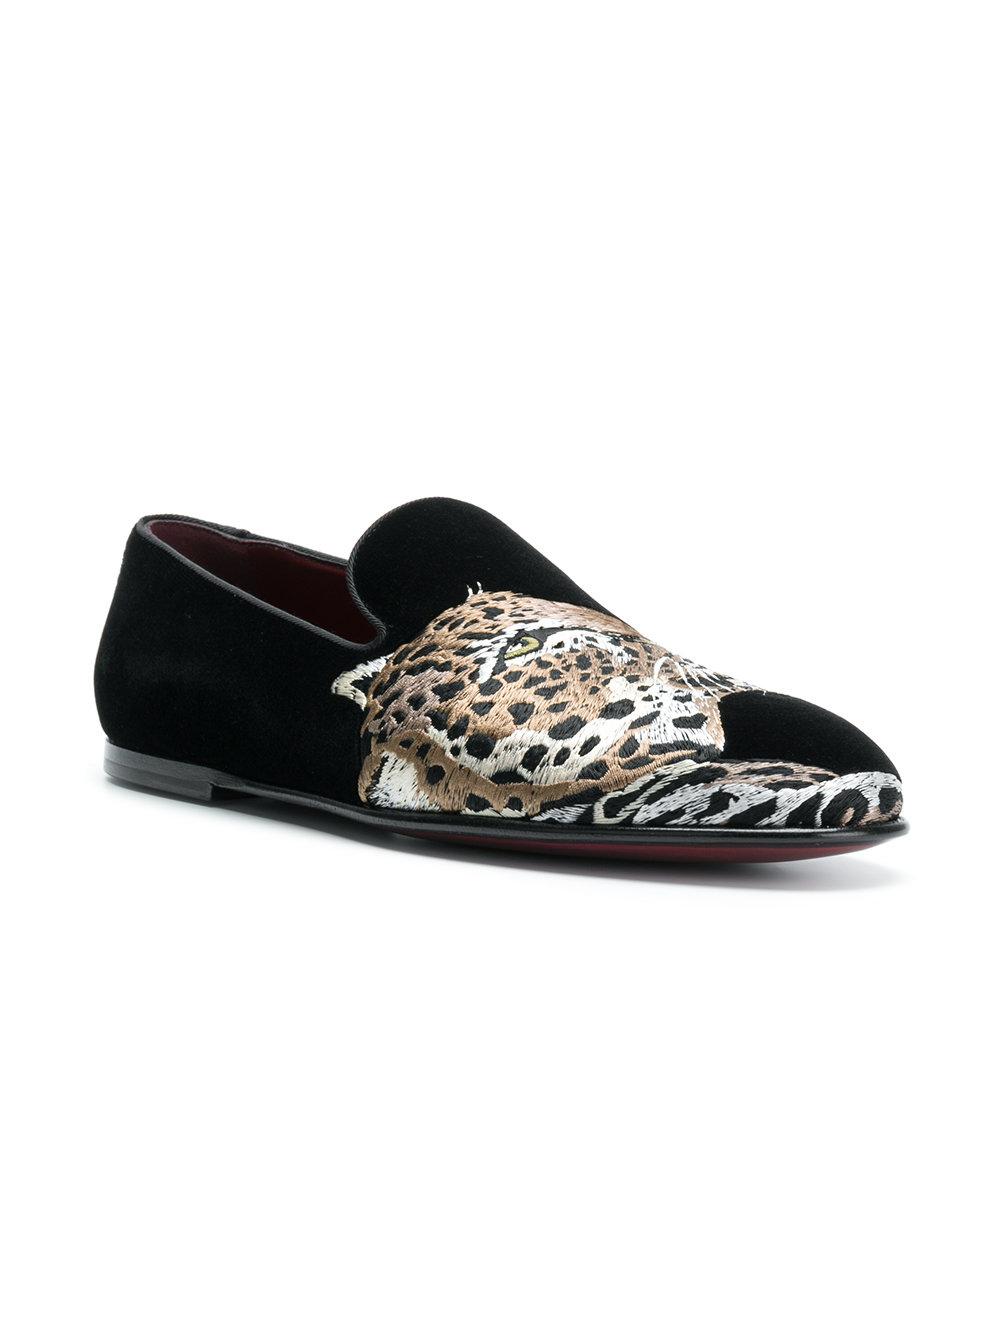 Dolce & Gabbana Synthetic Leopard Appliqué Loafers in Black for 